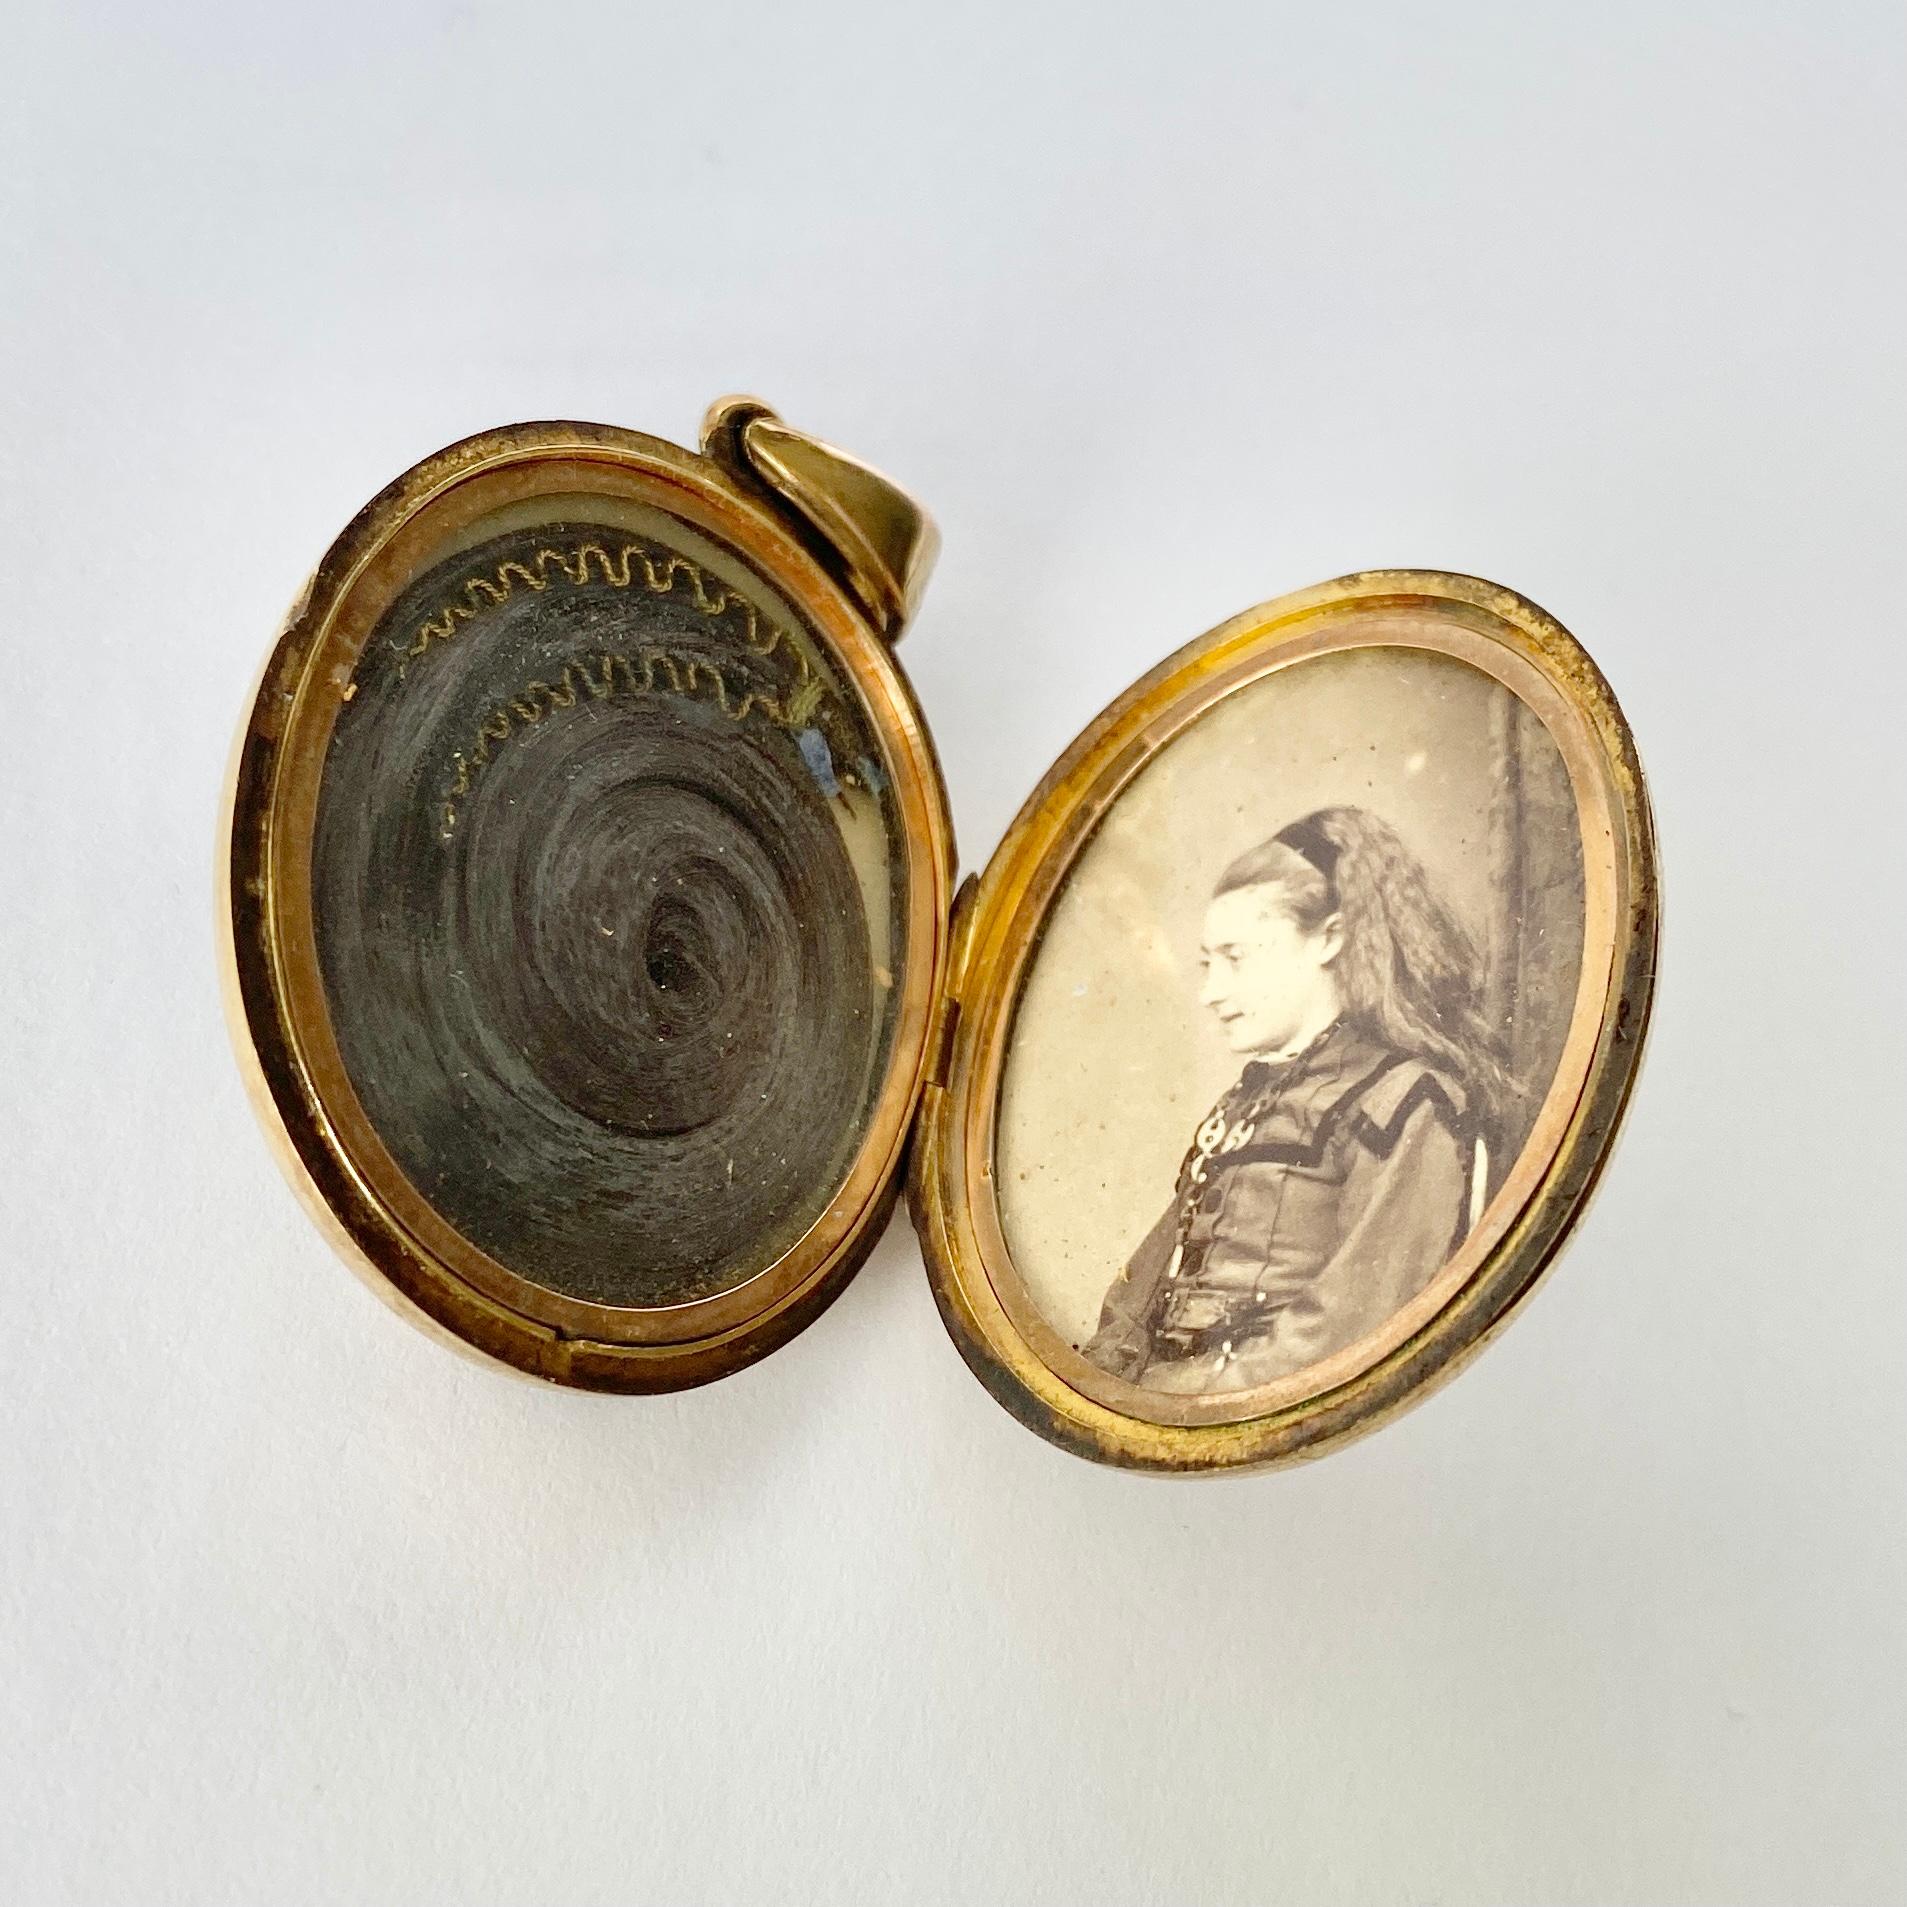 The enamel on this locket is black and wonderfully glossy, it really makes the gold pop. The locket also holds a cross on the front with the words 'in memoriam'. The back of the locket is simple gold and the inside holds a lock of hair and a picture